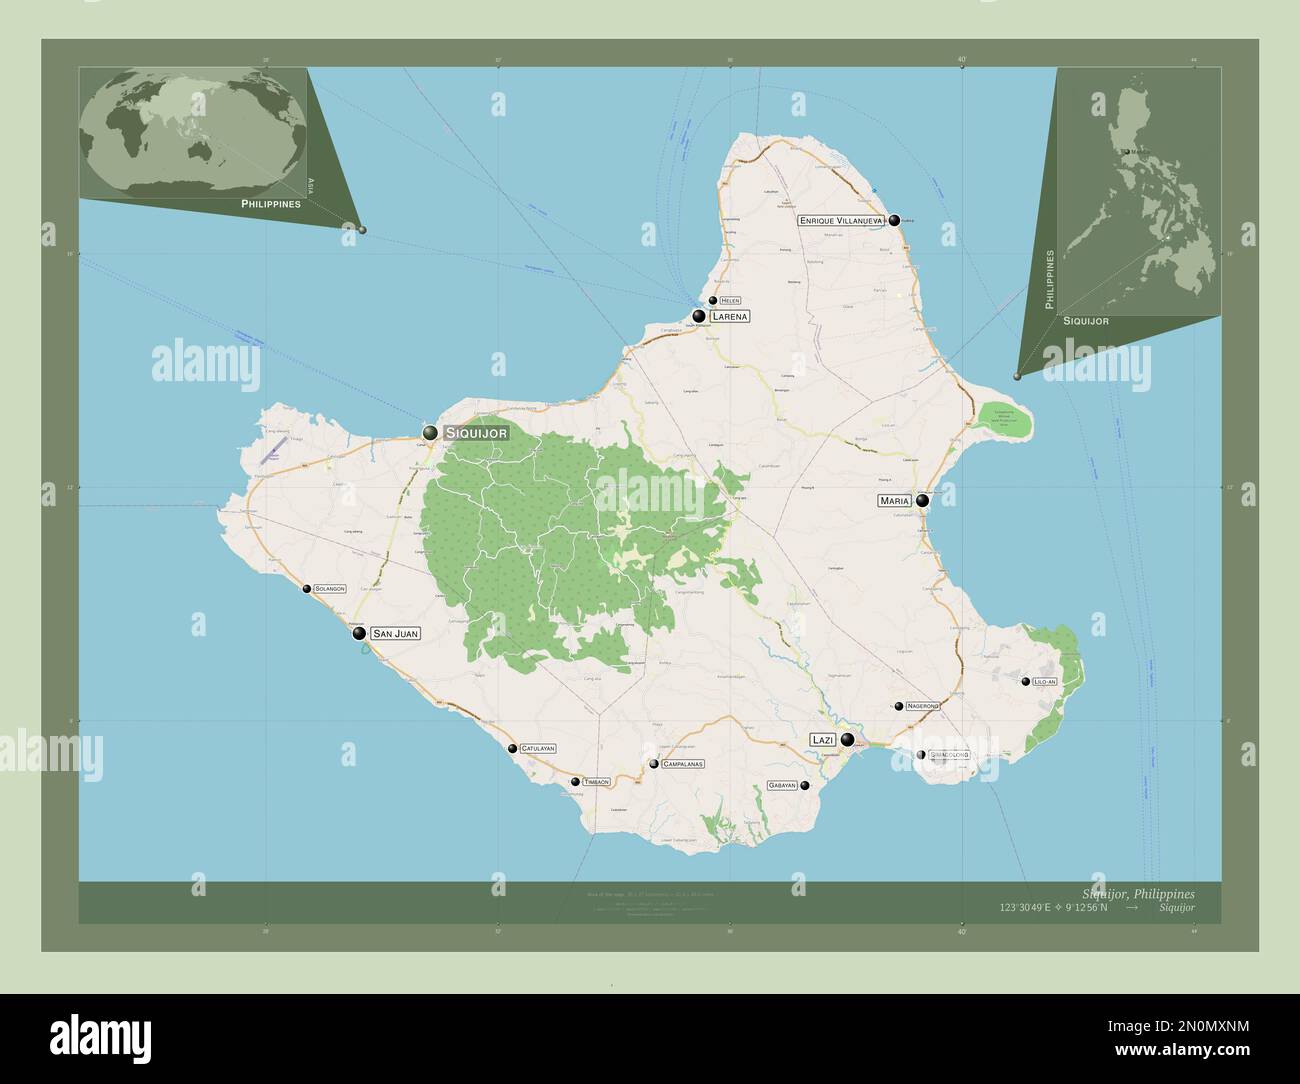 Siquijor, province of Philippines. Open Street Map. Locations and names of major cities of the region. Corner auxiliary location maps Stock Photo